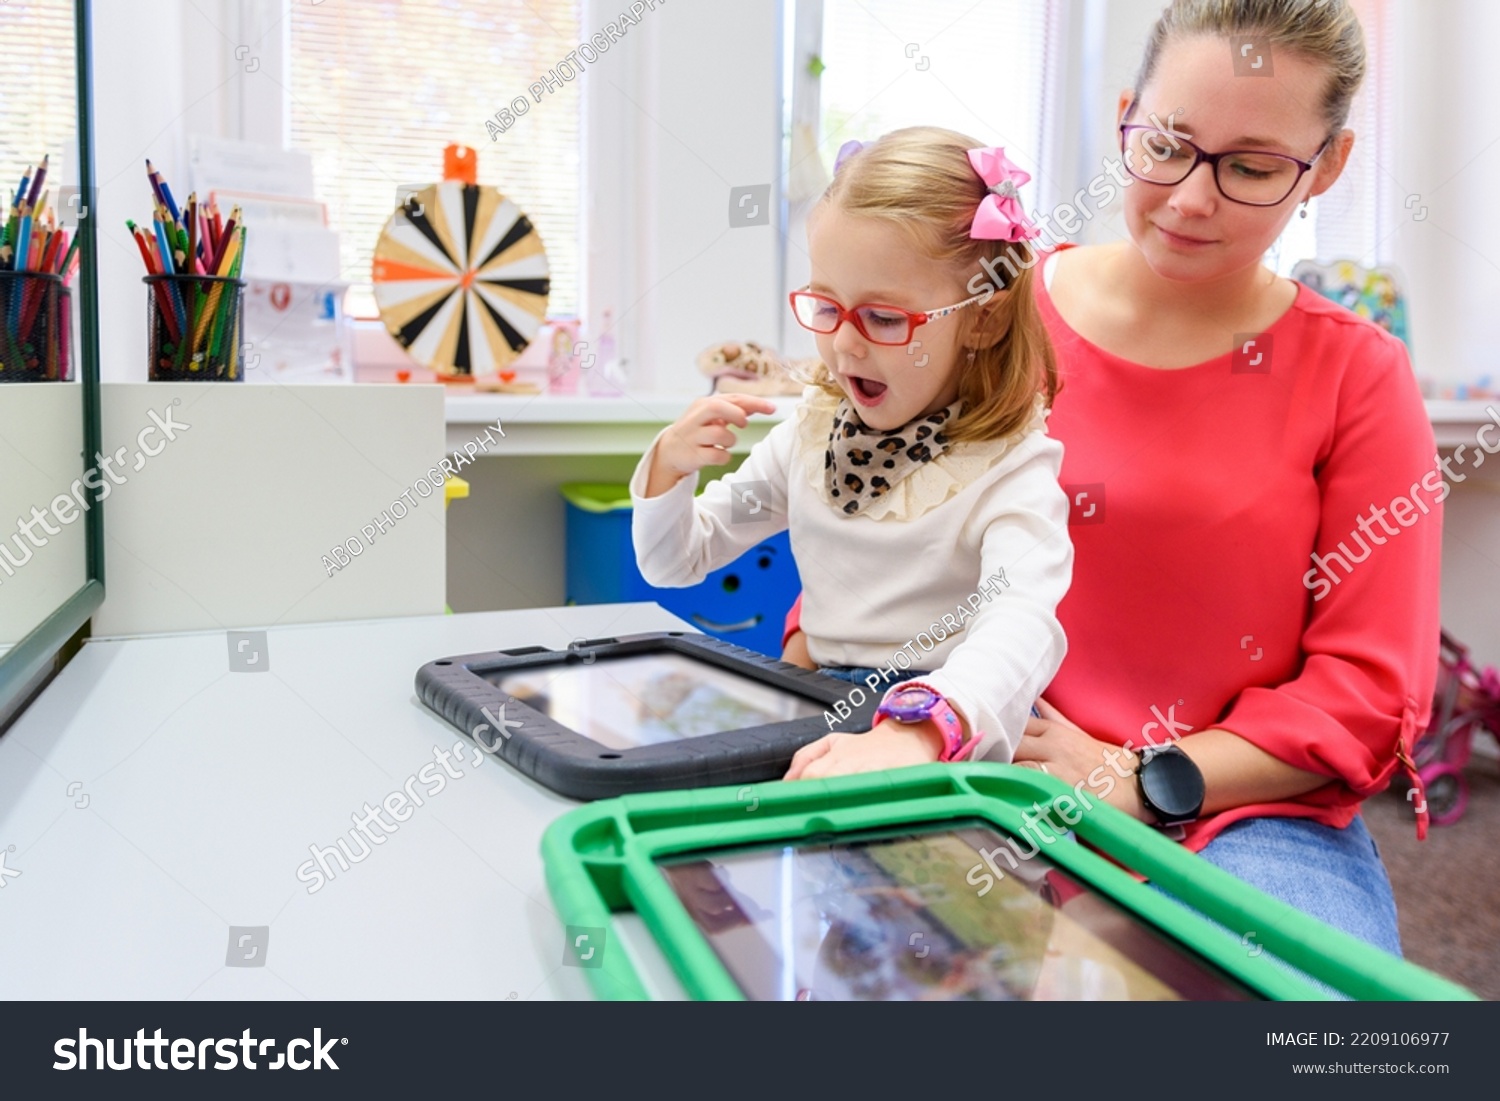 Non-verbal girl living with cerebral palsy, learning to use digital tablet device to communicate. People who have difficulty developing language or using speech use speech-generating devices. #2209106977